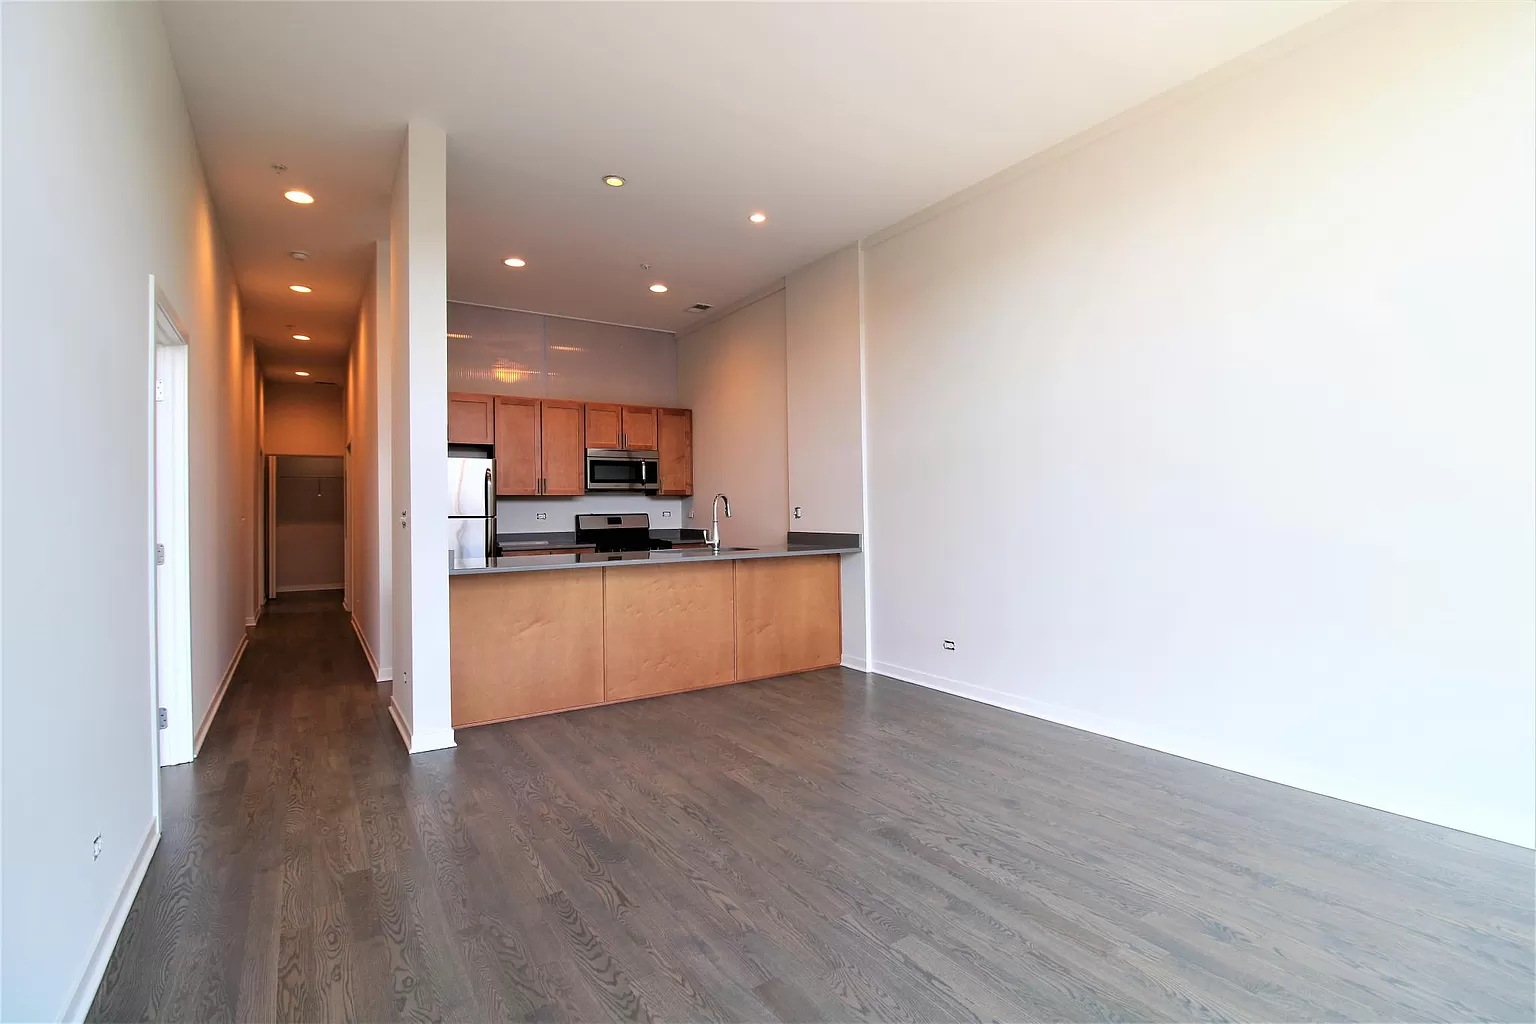 Apartments Near Midwest College of Oriental Medicine-Chicago 2.5 Bed 2 bath apartment - Available for lease takeover or looking for a room mate for Midwest College of Oriental Medicine-Chicago Students in Chicago, IL